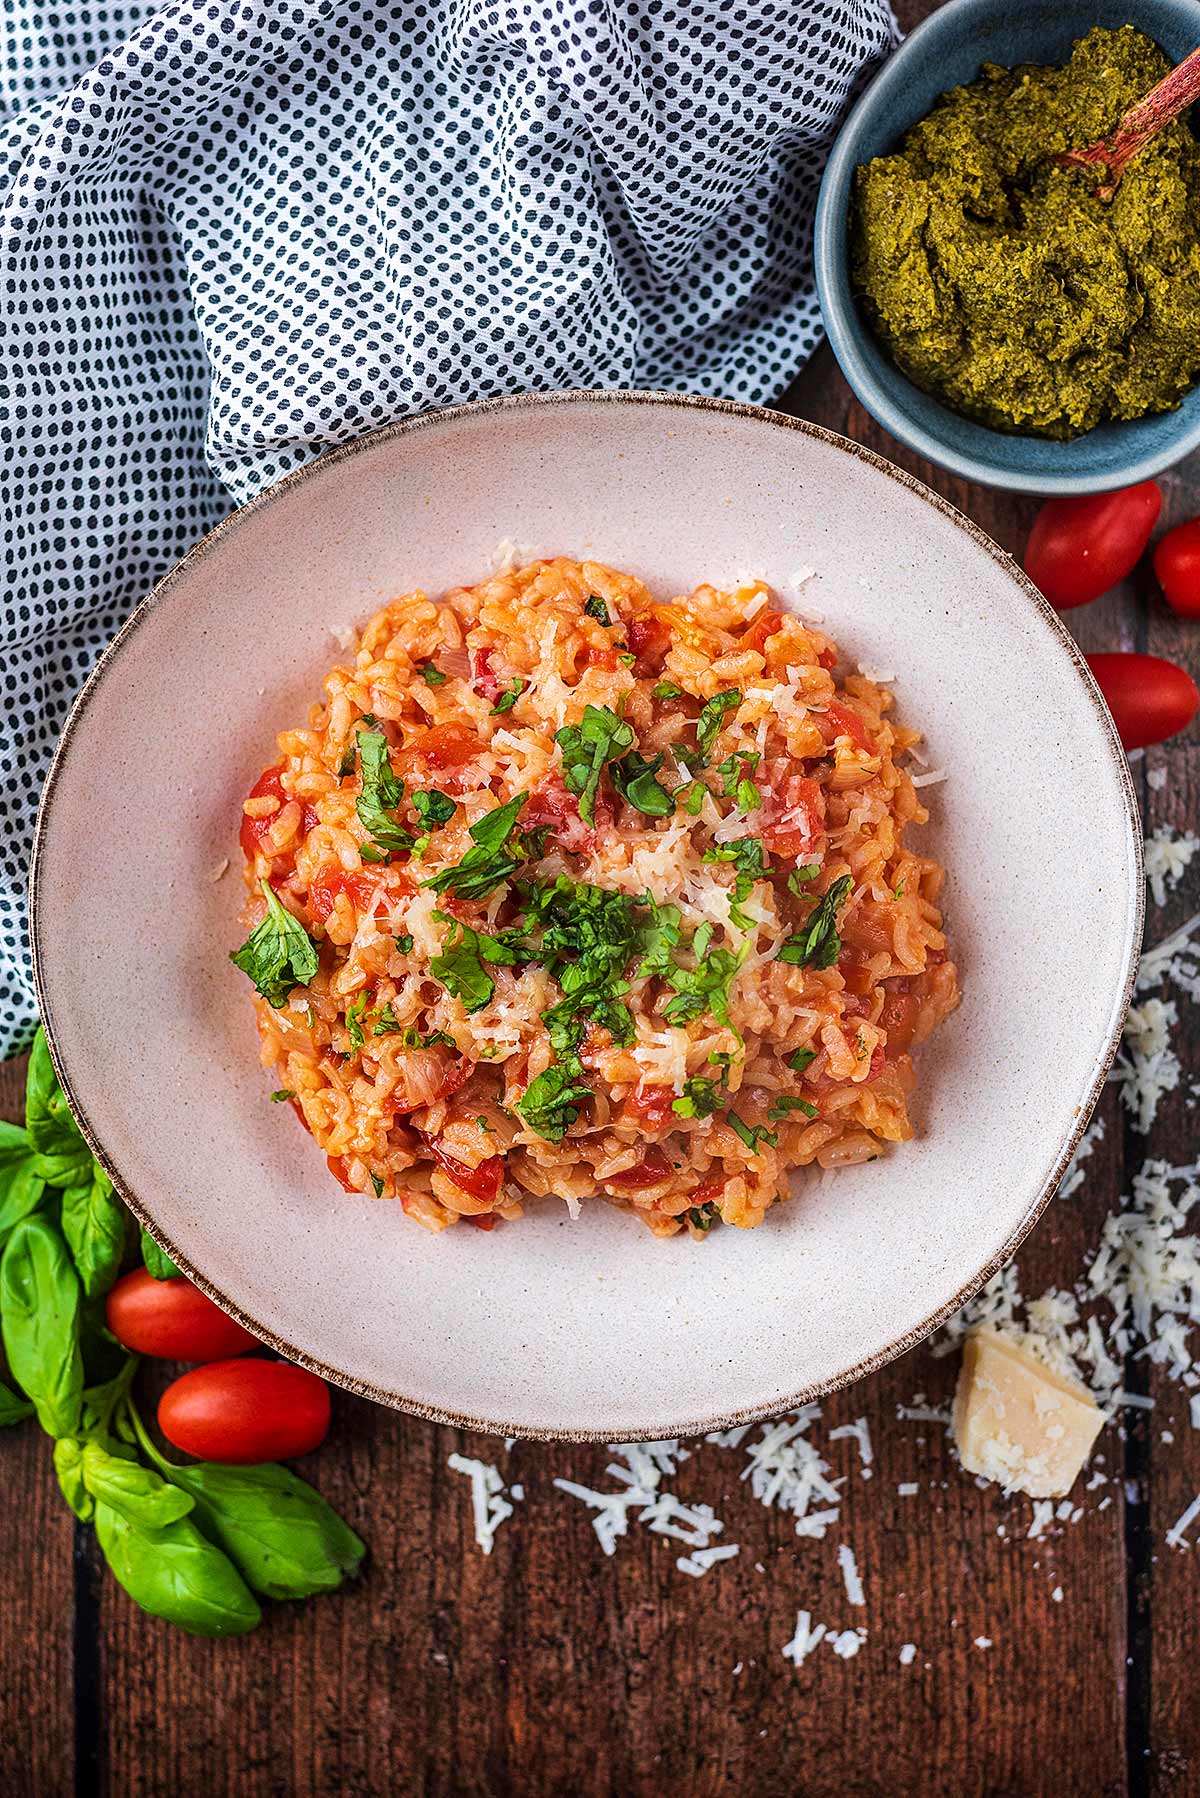 Tomato risotto in a large bowl next to a bowl of pesto.